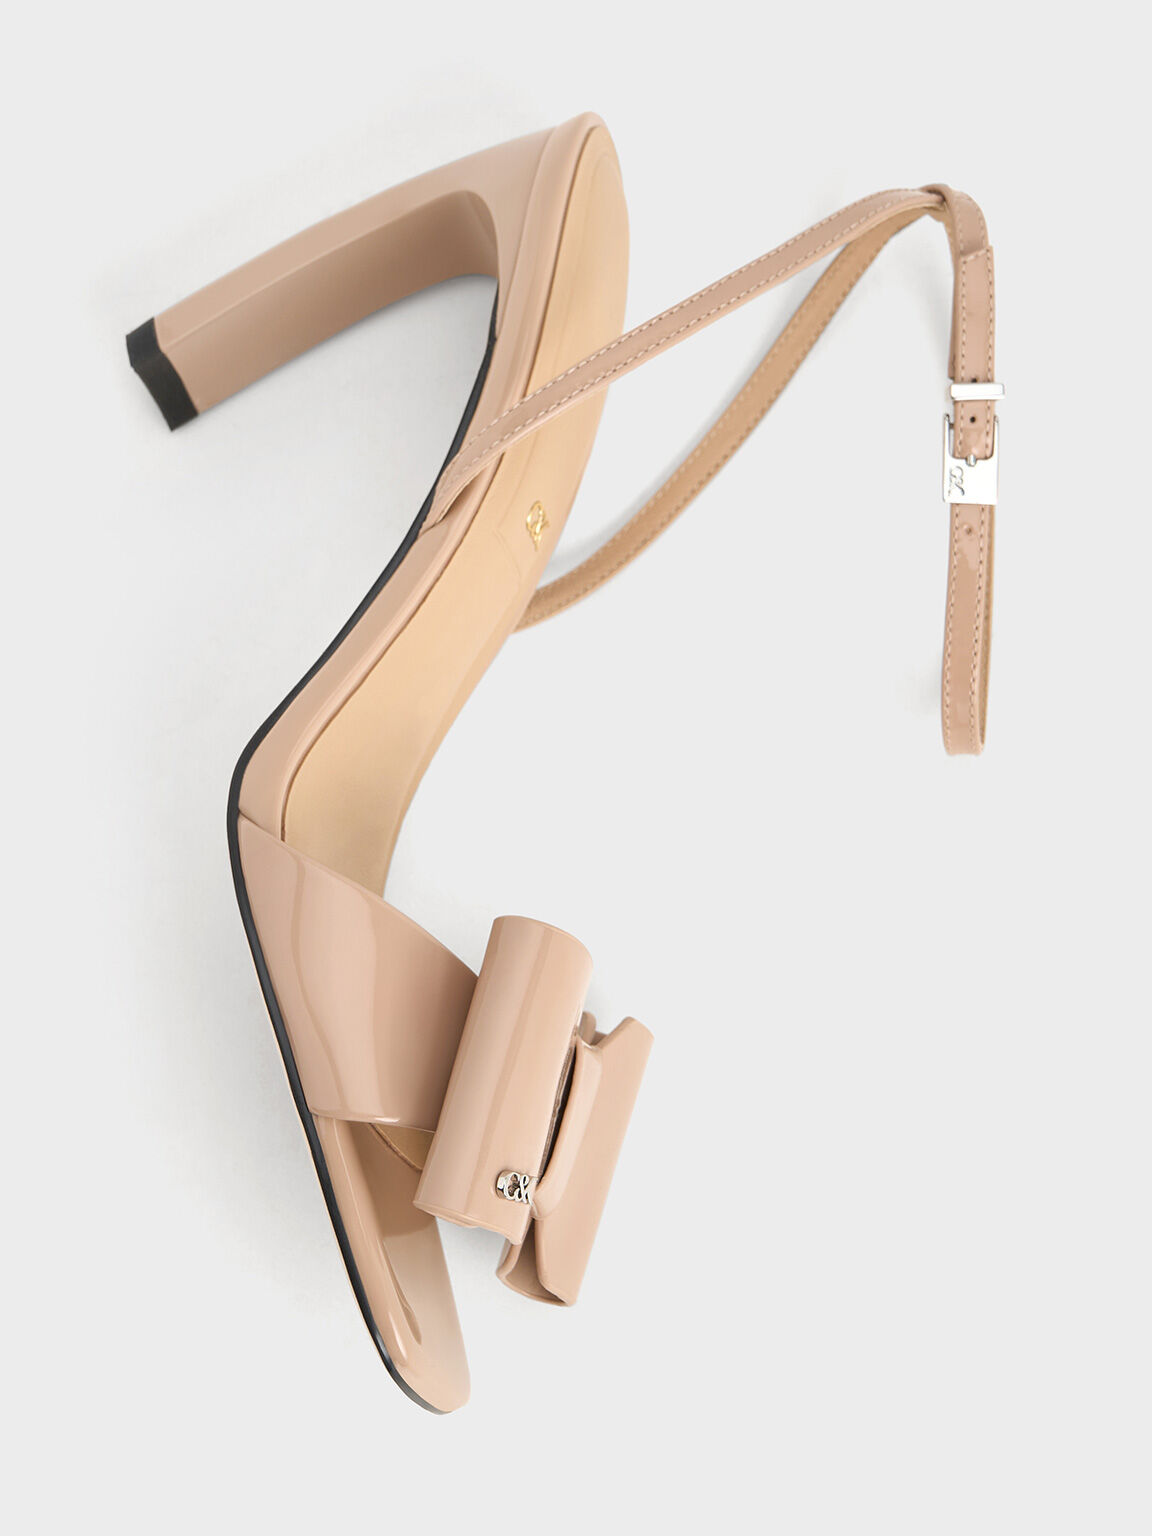 Lu Patent Leather Bow Blade-Heel Sandals, Nude, hi-res